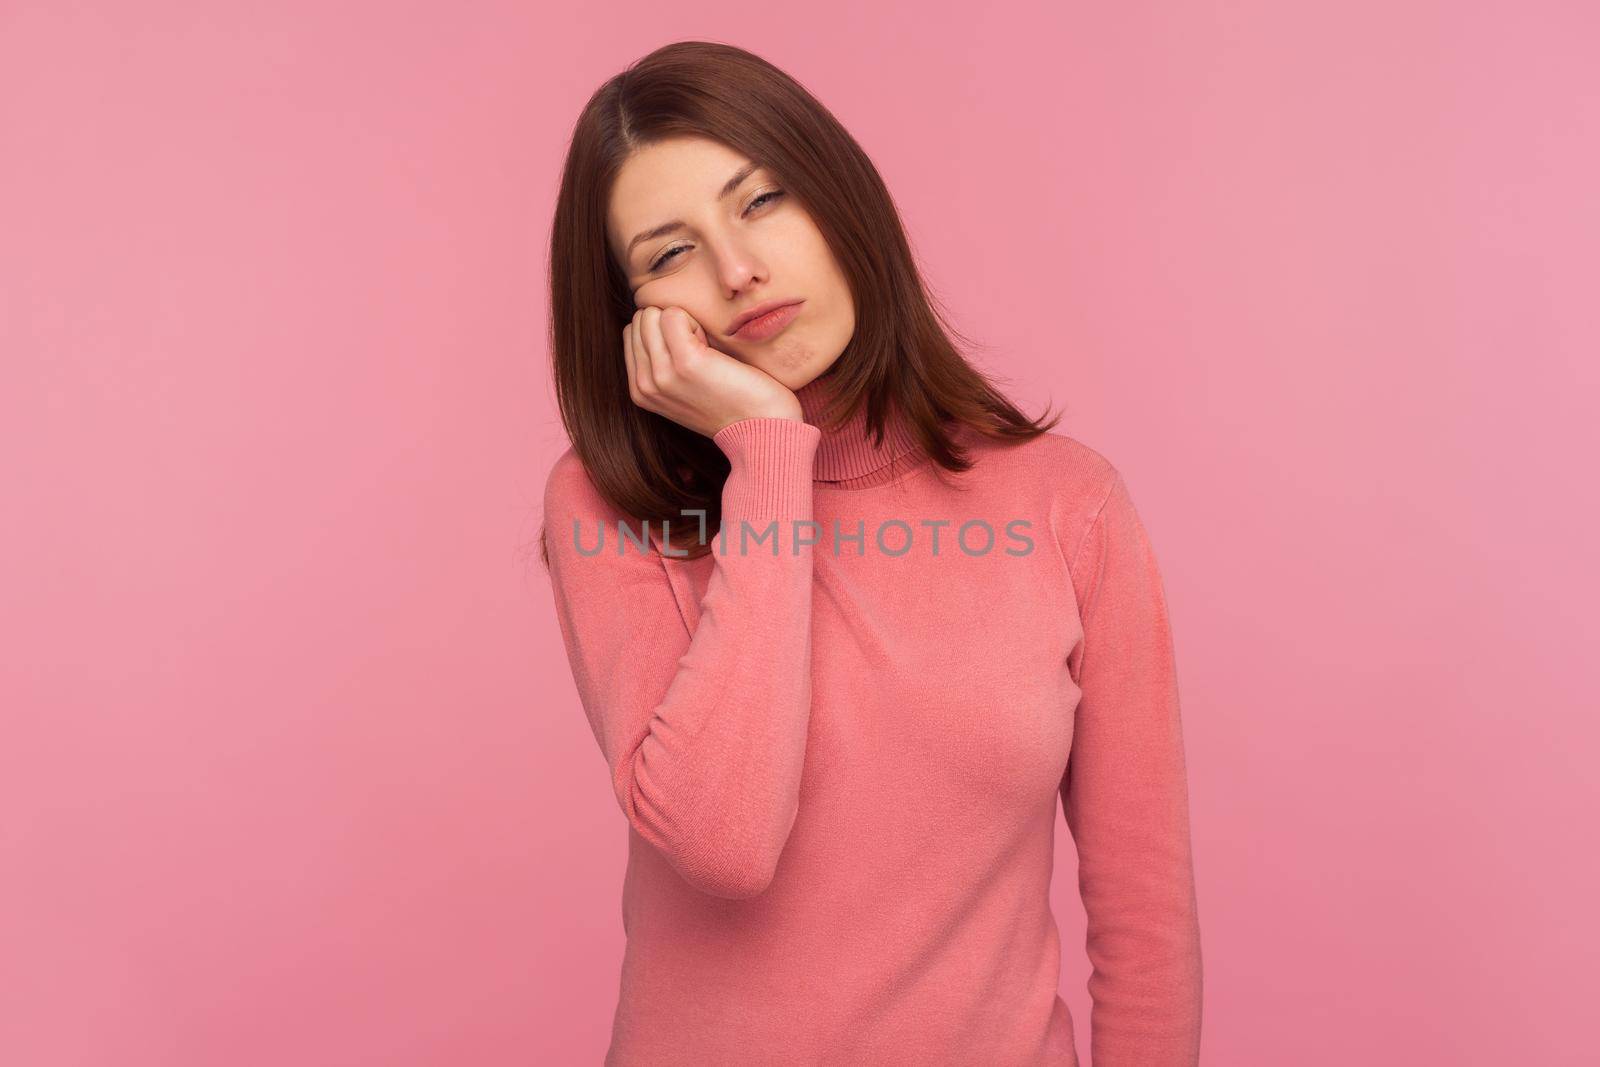 Lonely tired woman in pink sweater leaning head on hand, looking with bored expression, exhausted with overwork. Indoor studio shot isolated on pink background